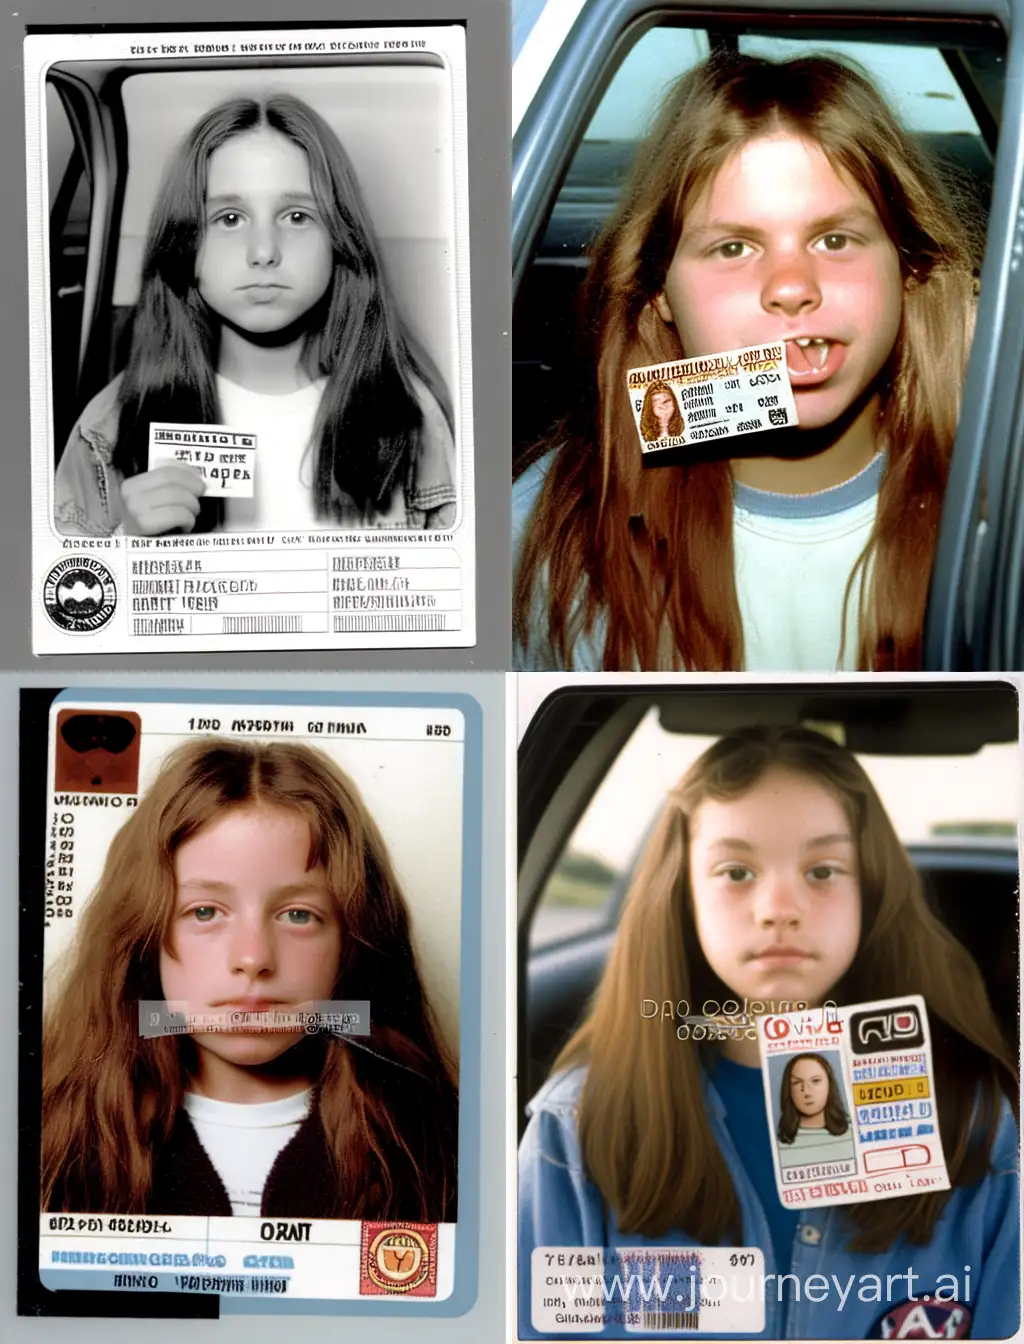 There’s a driver license. The information says she’s from California, was born on May 11th 2005. This teenage girl has brown-long hair separated in the middle, looks annoyed, has some childish stickers all over her face and is sticking out her tongue for the picture of hee driver license. Her name is Olivia 